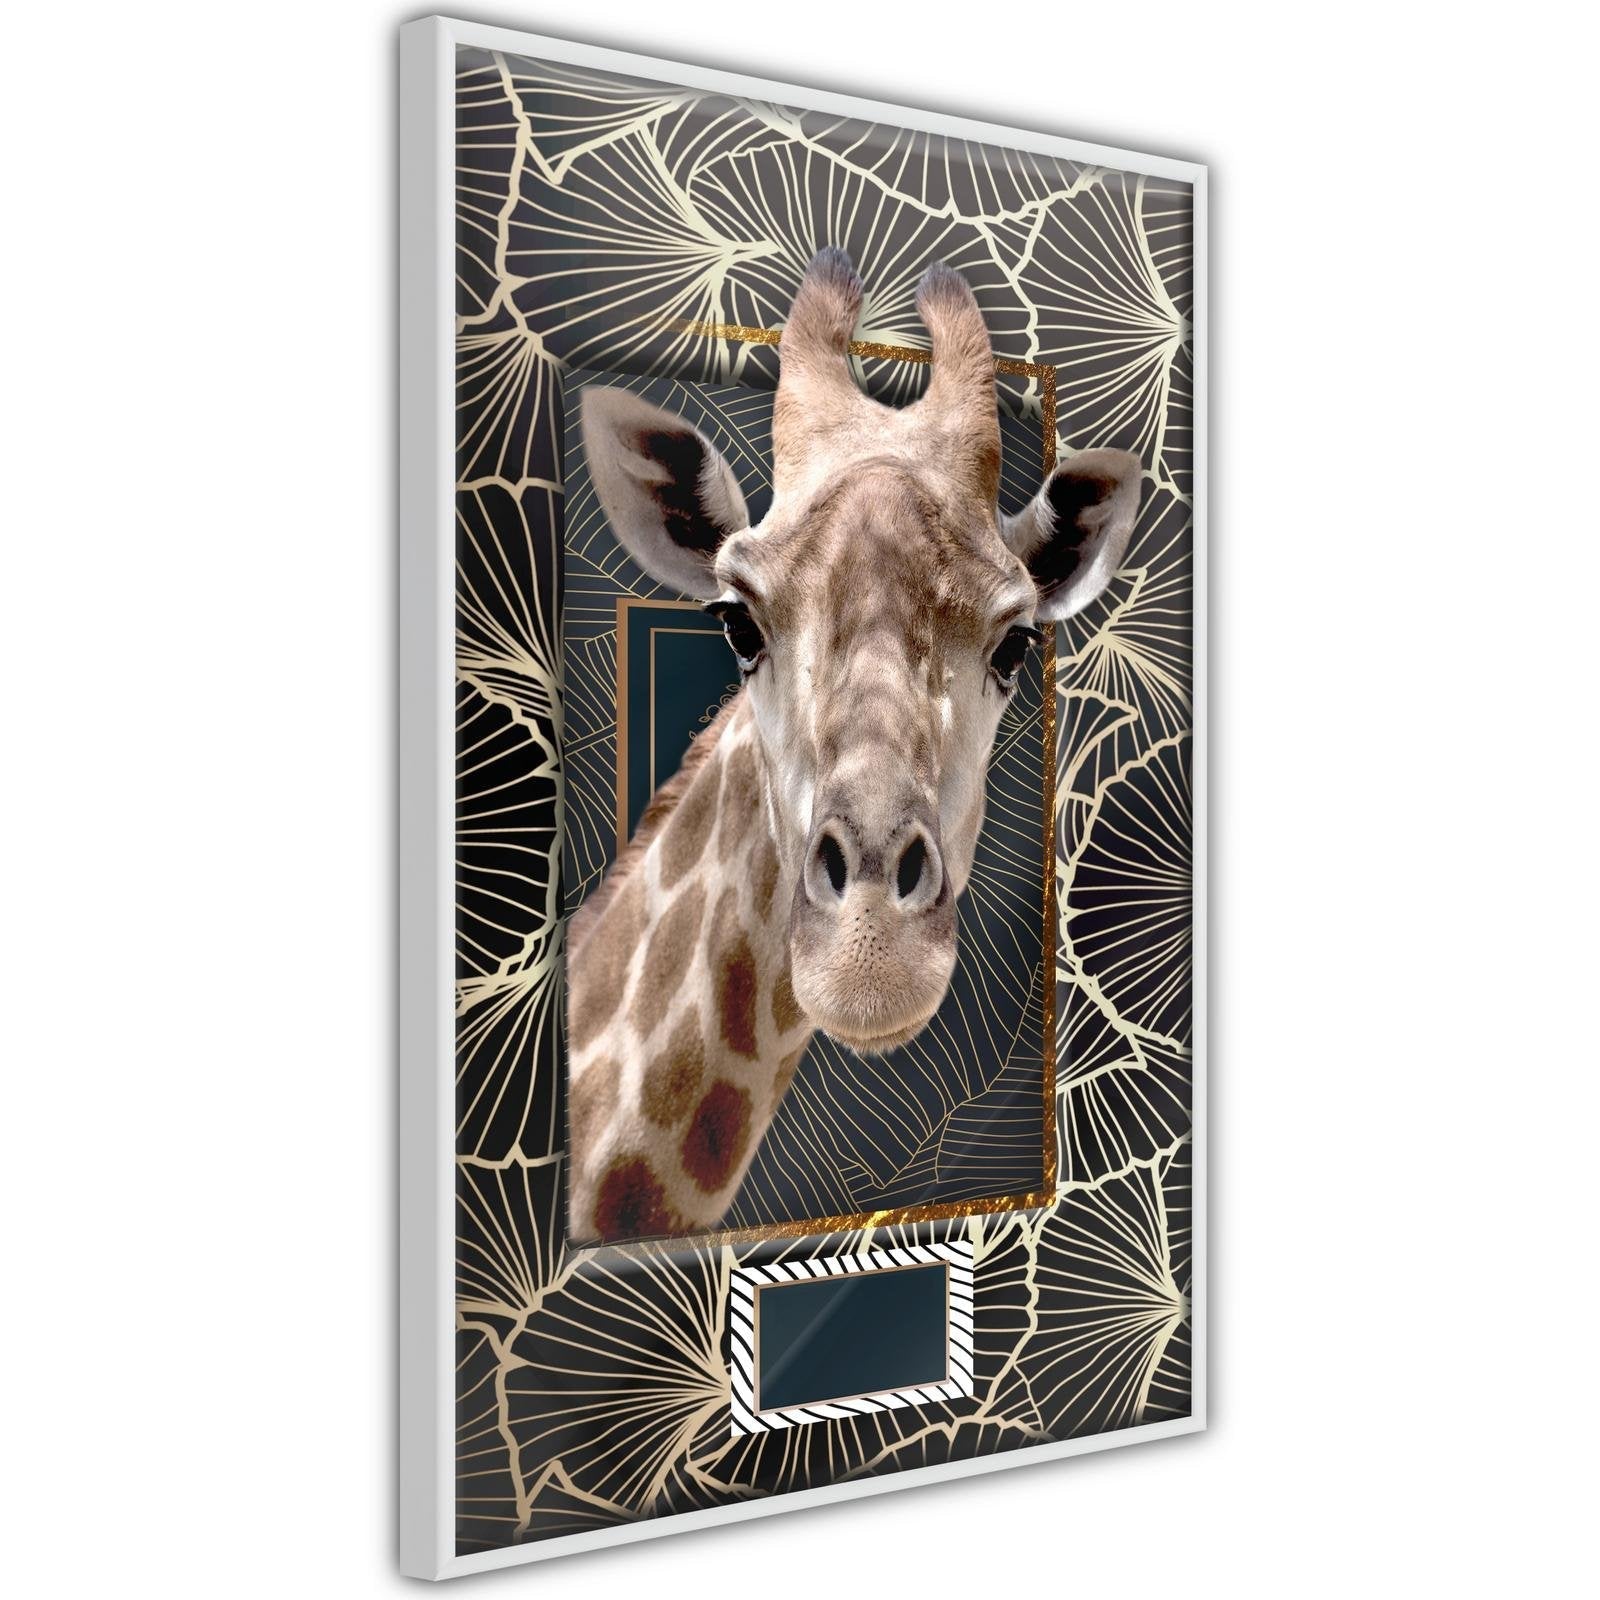 Inramad Poster / Tavla - Giraffe in the Frame-Poster Inramad-Artgeist-peaceofhome.se